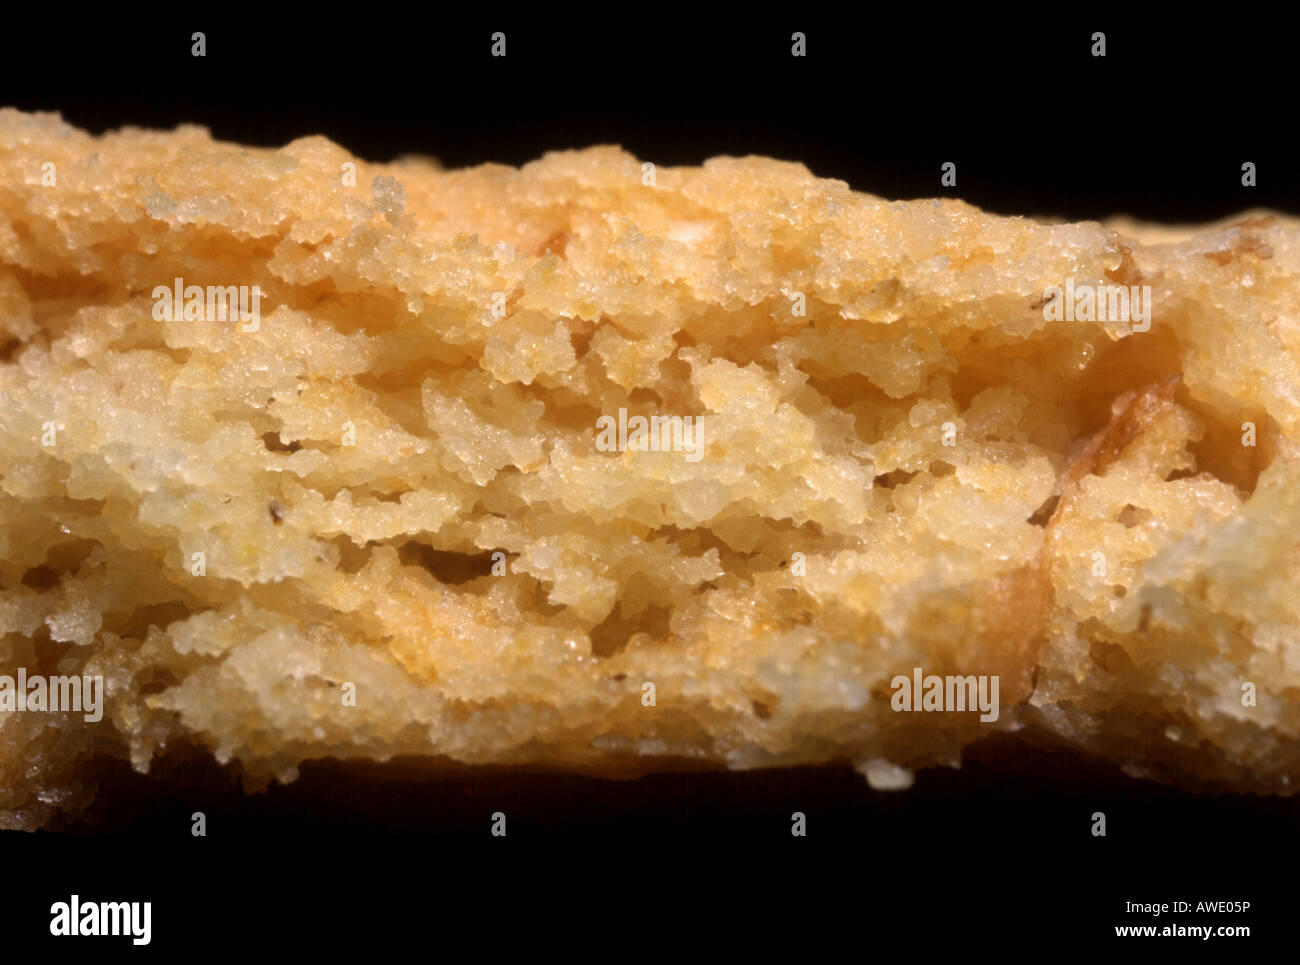 Cross section through a biscuit Stock Photo